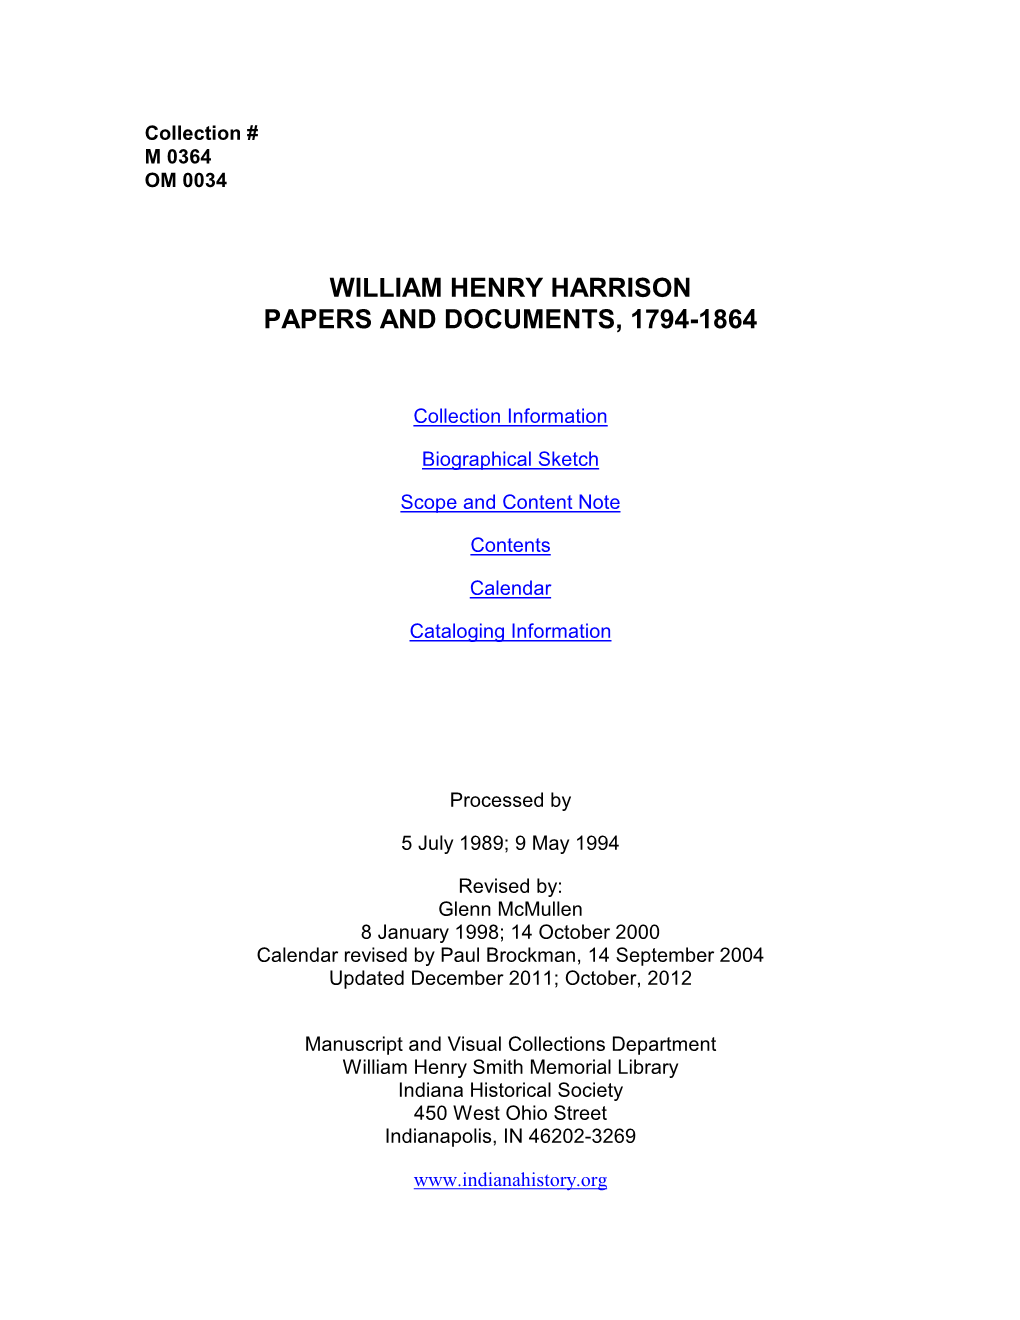 William Henry Harrison Papers and Documents, 1794-1864